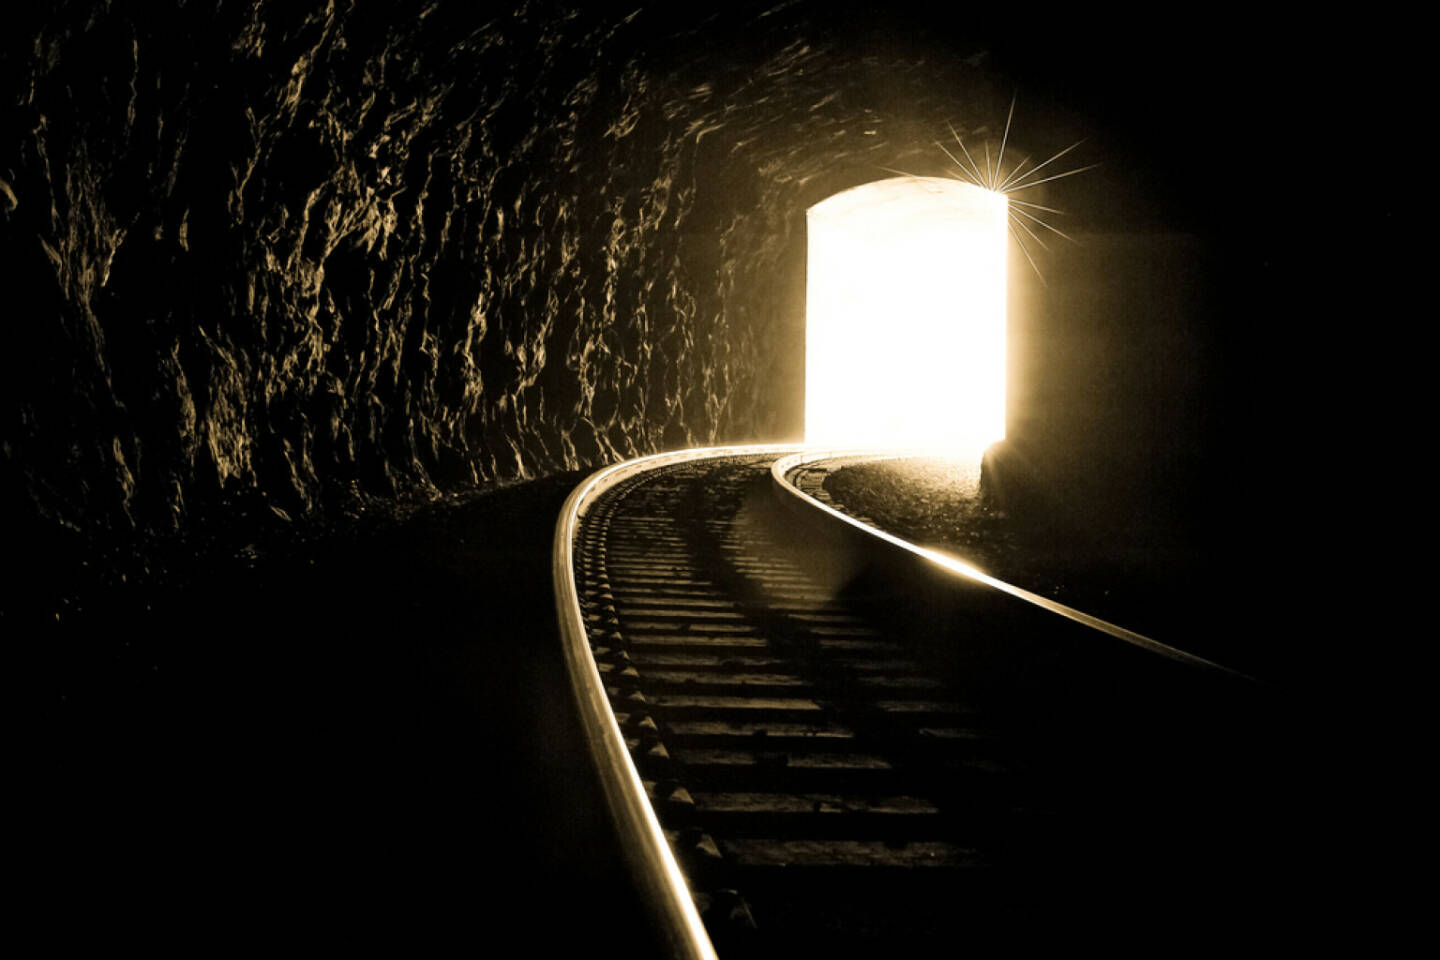 Lichtblick, Tunnel, Schienen, Eisenbahn, Bahn, Zug, Hoffnung, Licht am Ende des Tunnels, aufwärts, Erleuchtung, Ausweg, Hilfe, http://www.shutterstock.com/de/pic-115459123/stock-photo-this-image-brings-about-hope-and-strength-in-difficult-times-it-is-important-to-keep-your-faith.html